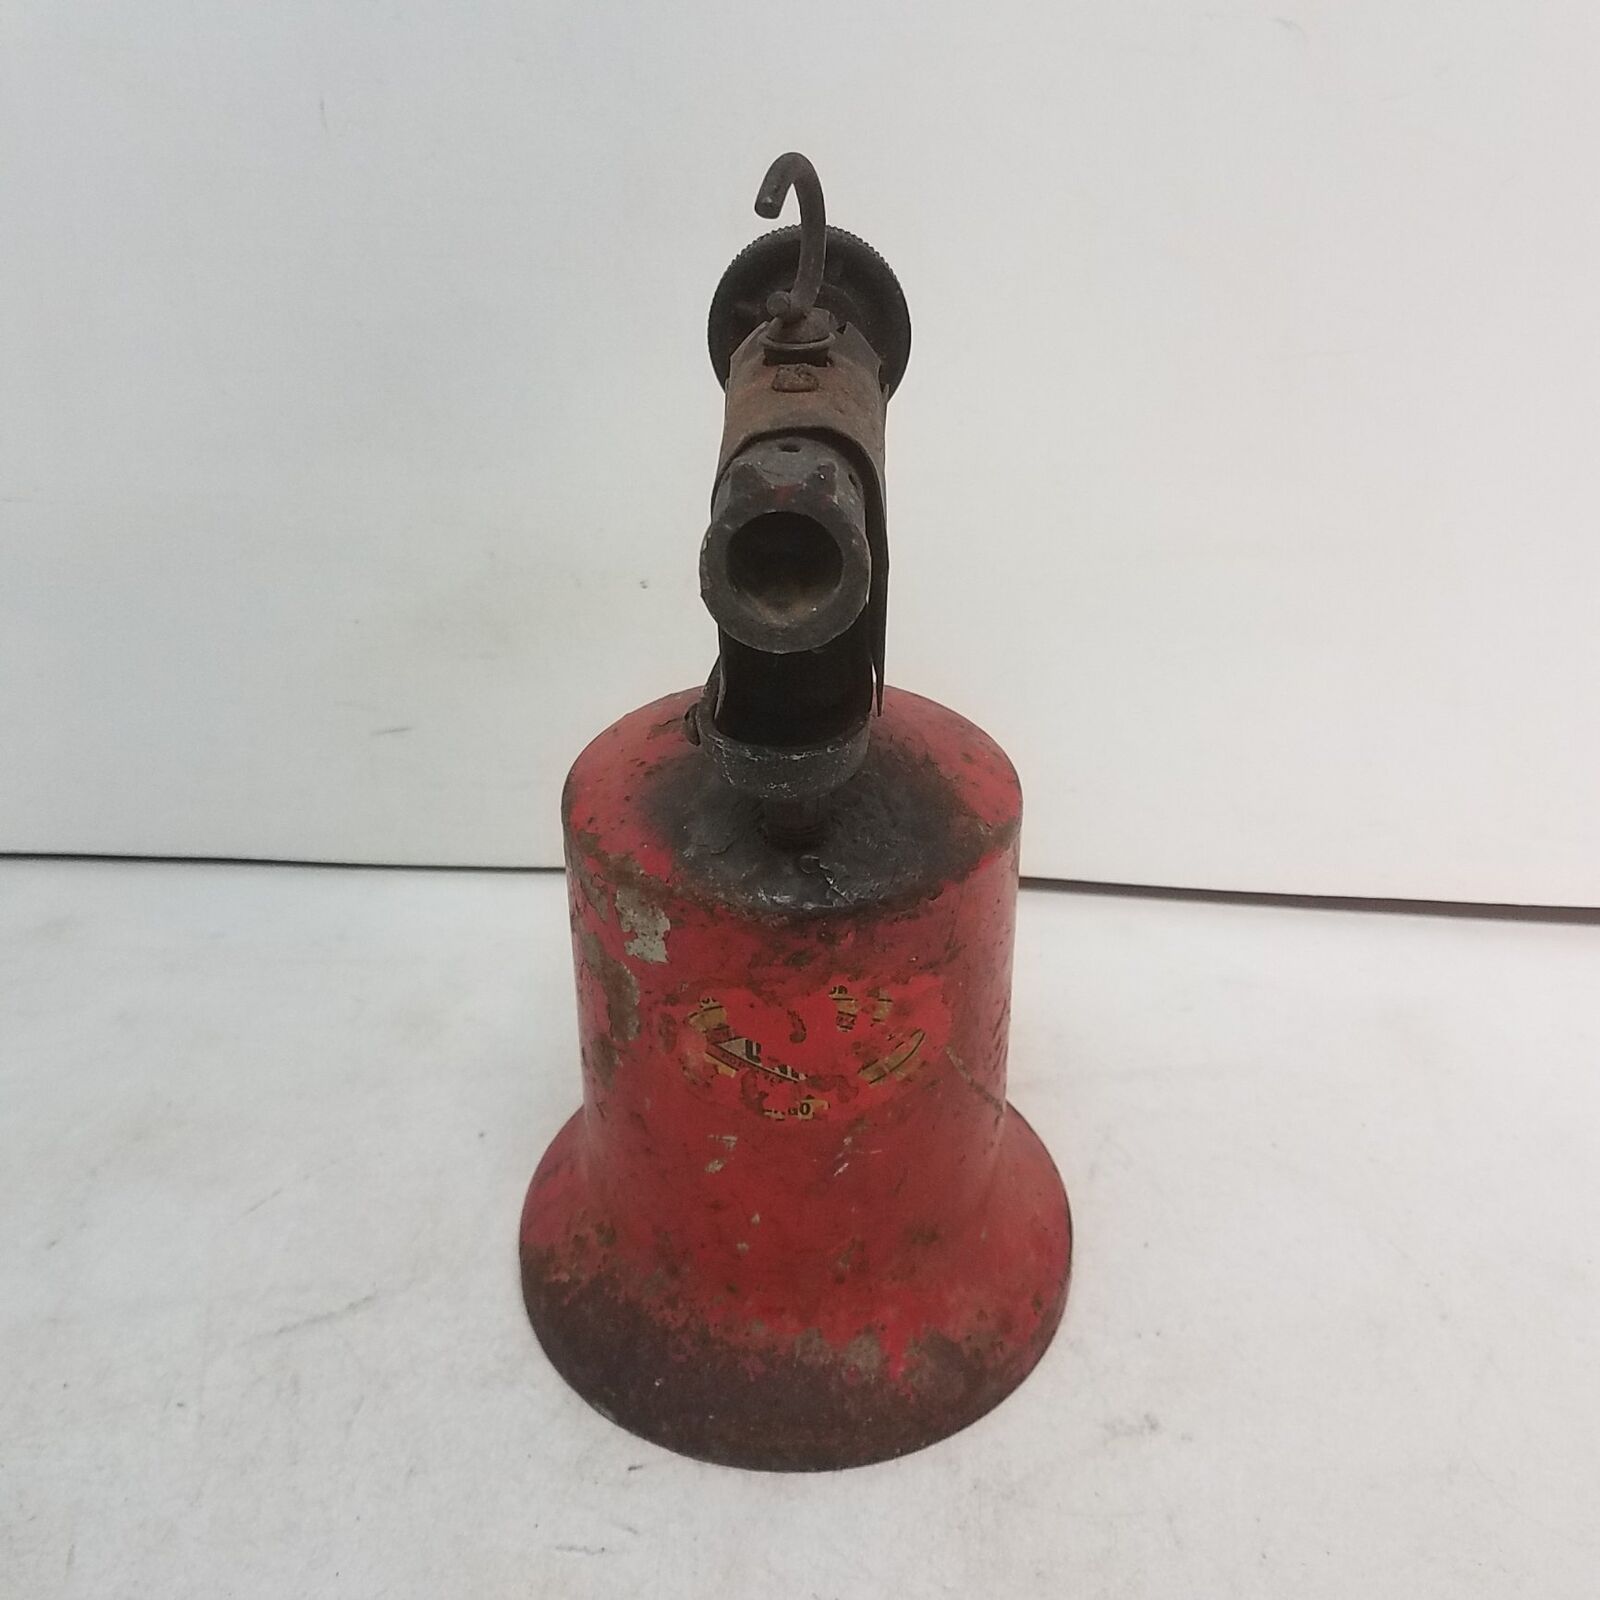 Untested Vintage Blow Torch